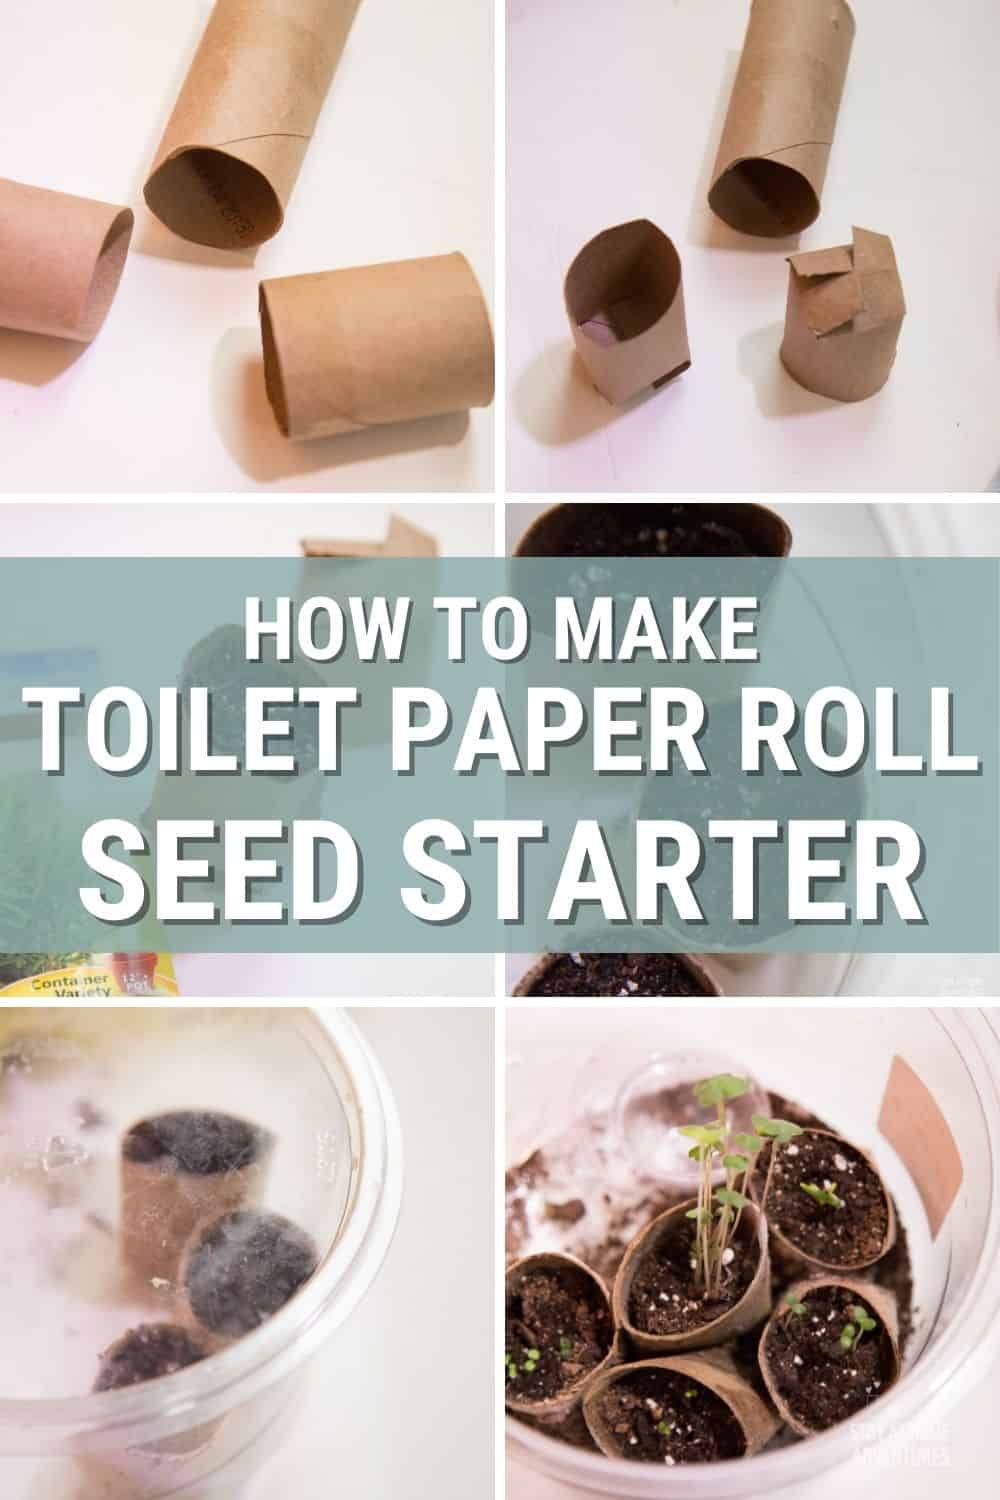 This toilet paper seed starter tutorial is all you need to seed starting indoor this season. Learn all you need to know and start growing your garden today. #gardening #seeding #toiletpaperseedstarter via @mystayathome